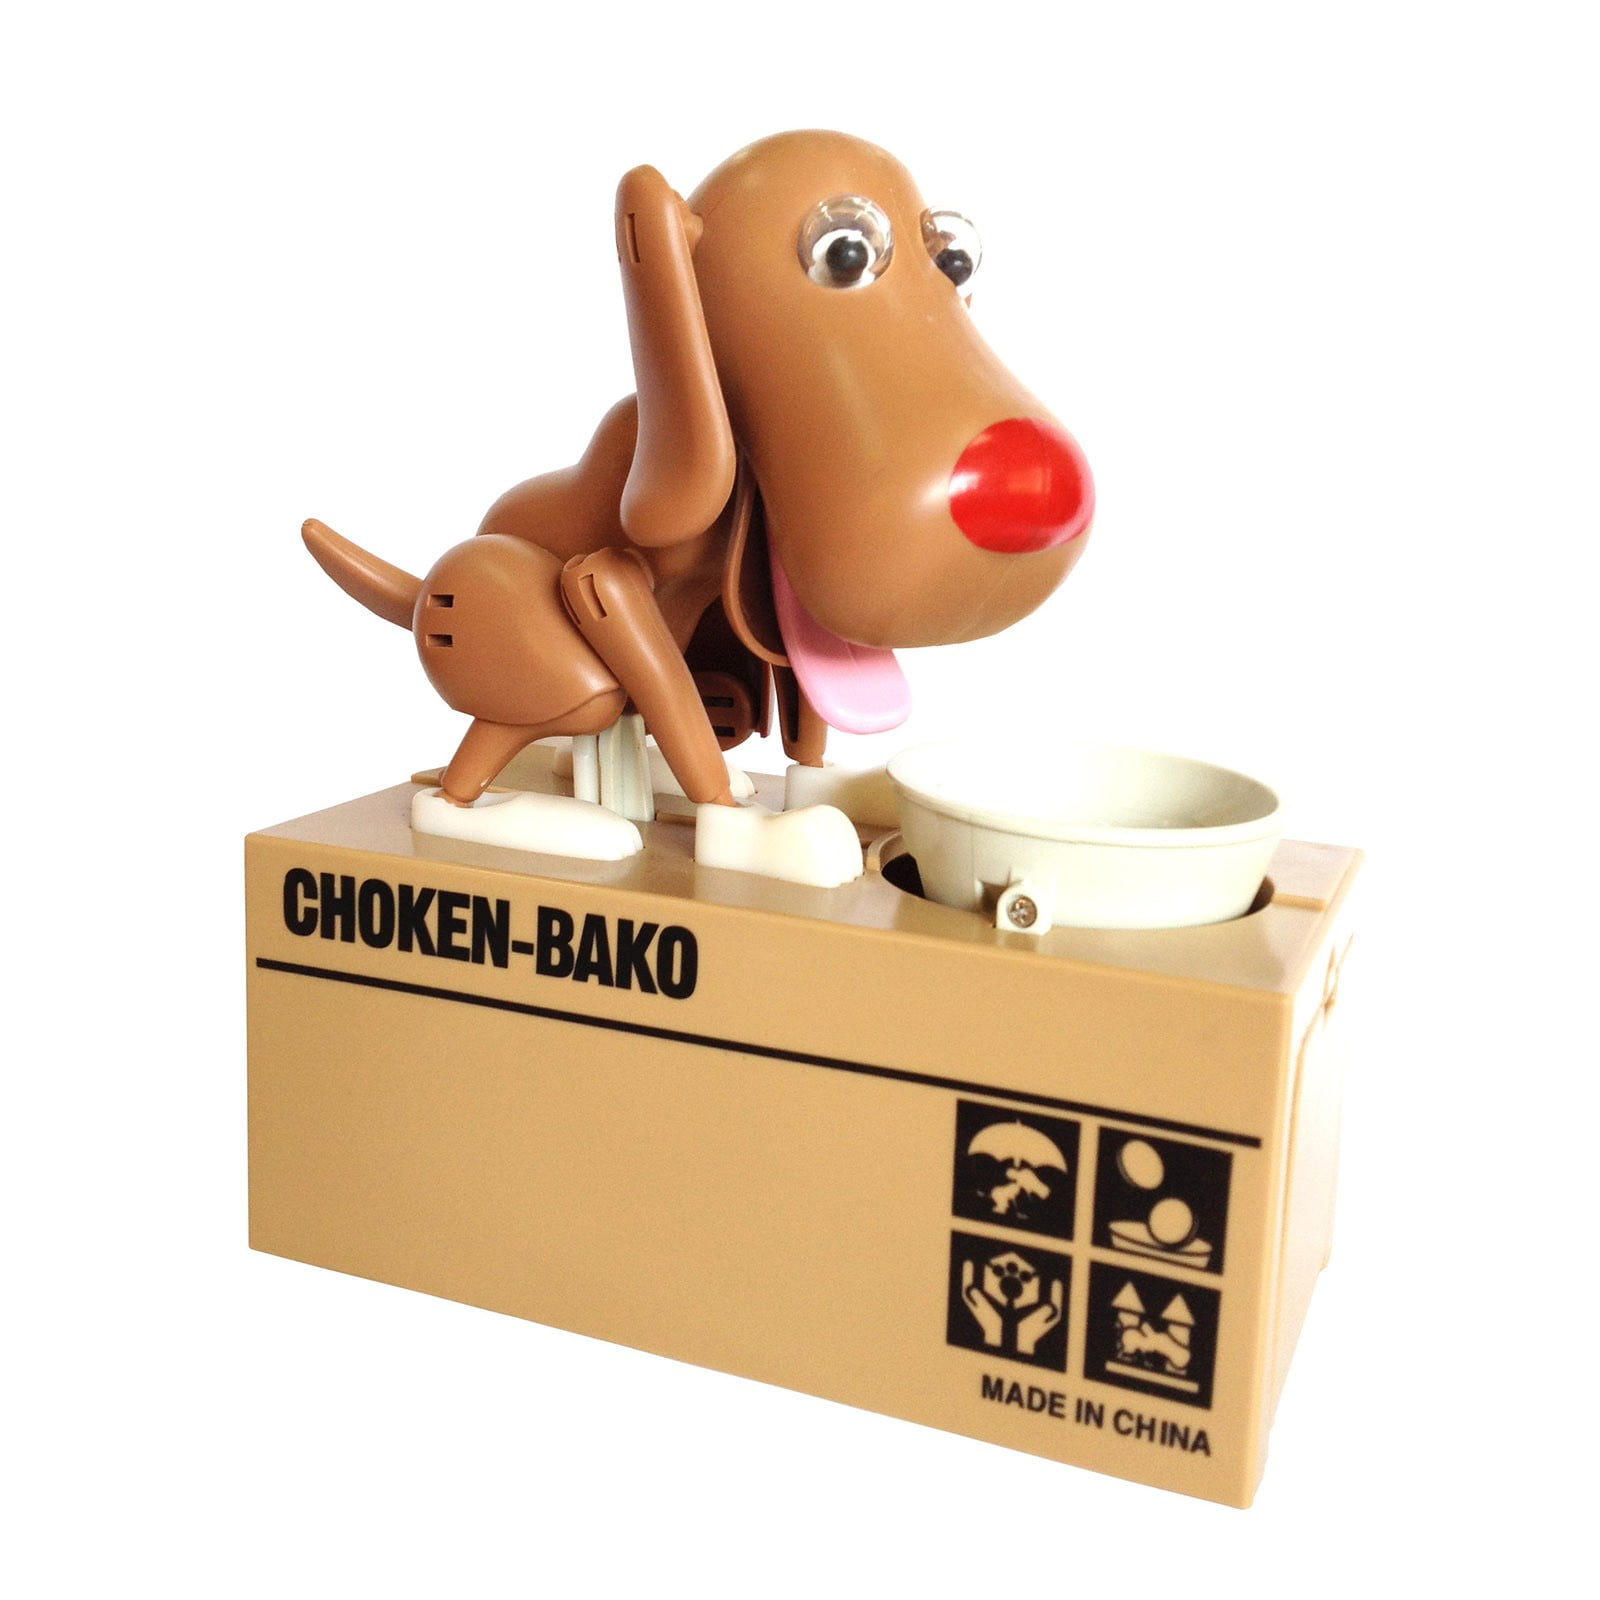 Saving Box,Counting Coin Money Bank,Coin Sorters for Kids Eat Money Dog Piggy Bank Black Puppy Money Saving Box Hungry Dog Piggy Bank Cute Automatic Stealing Coin Bank Dog Piggy Bank